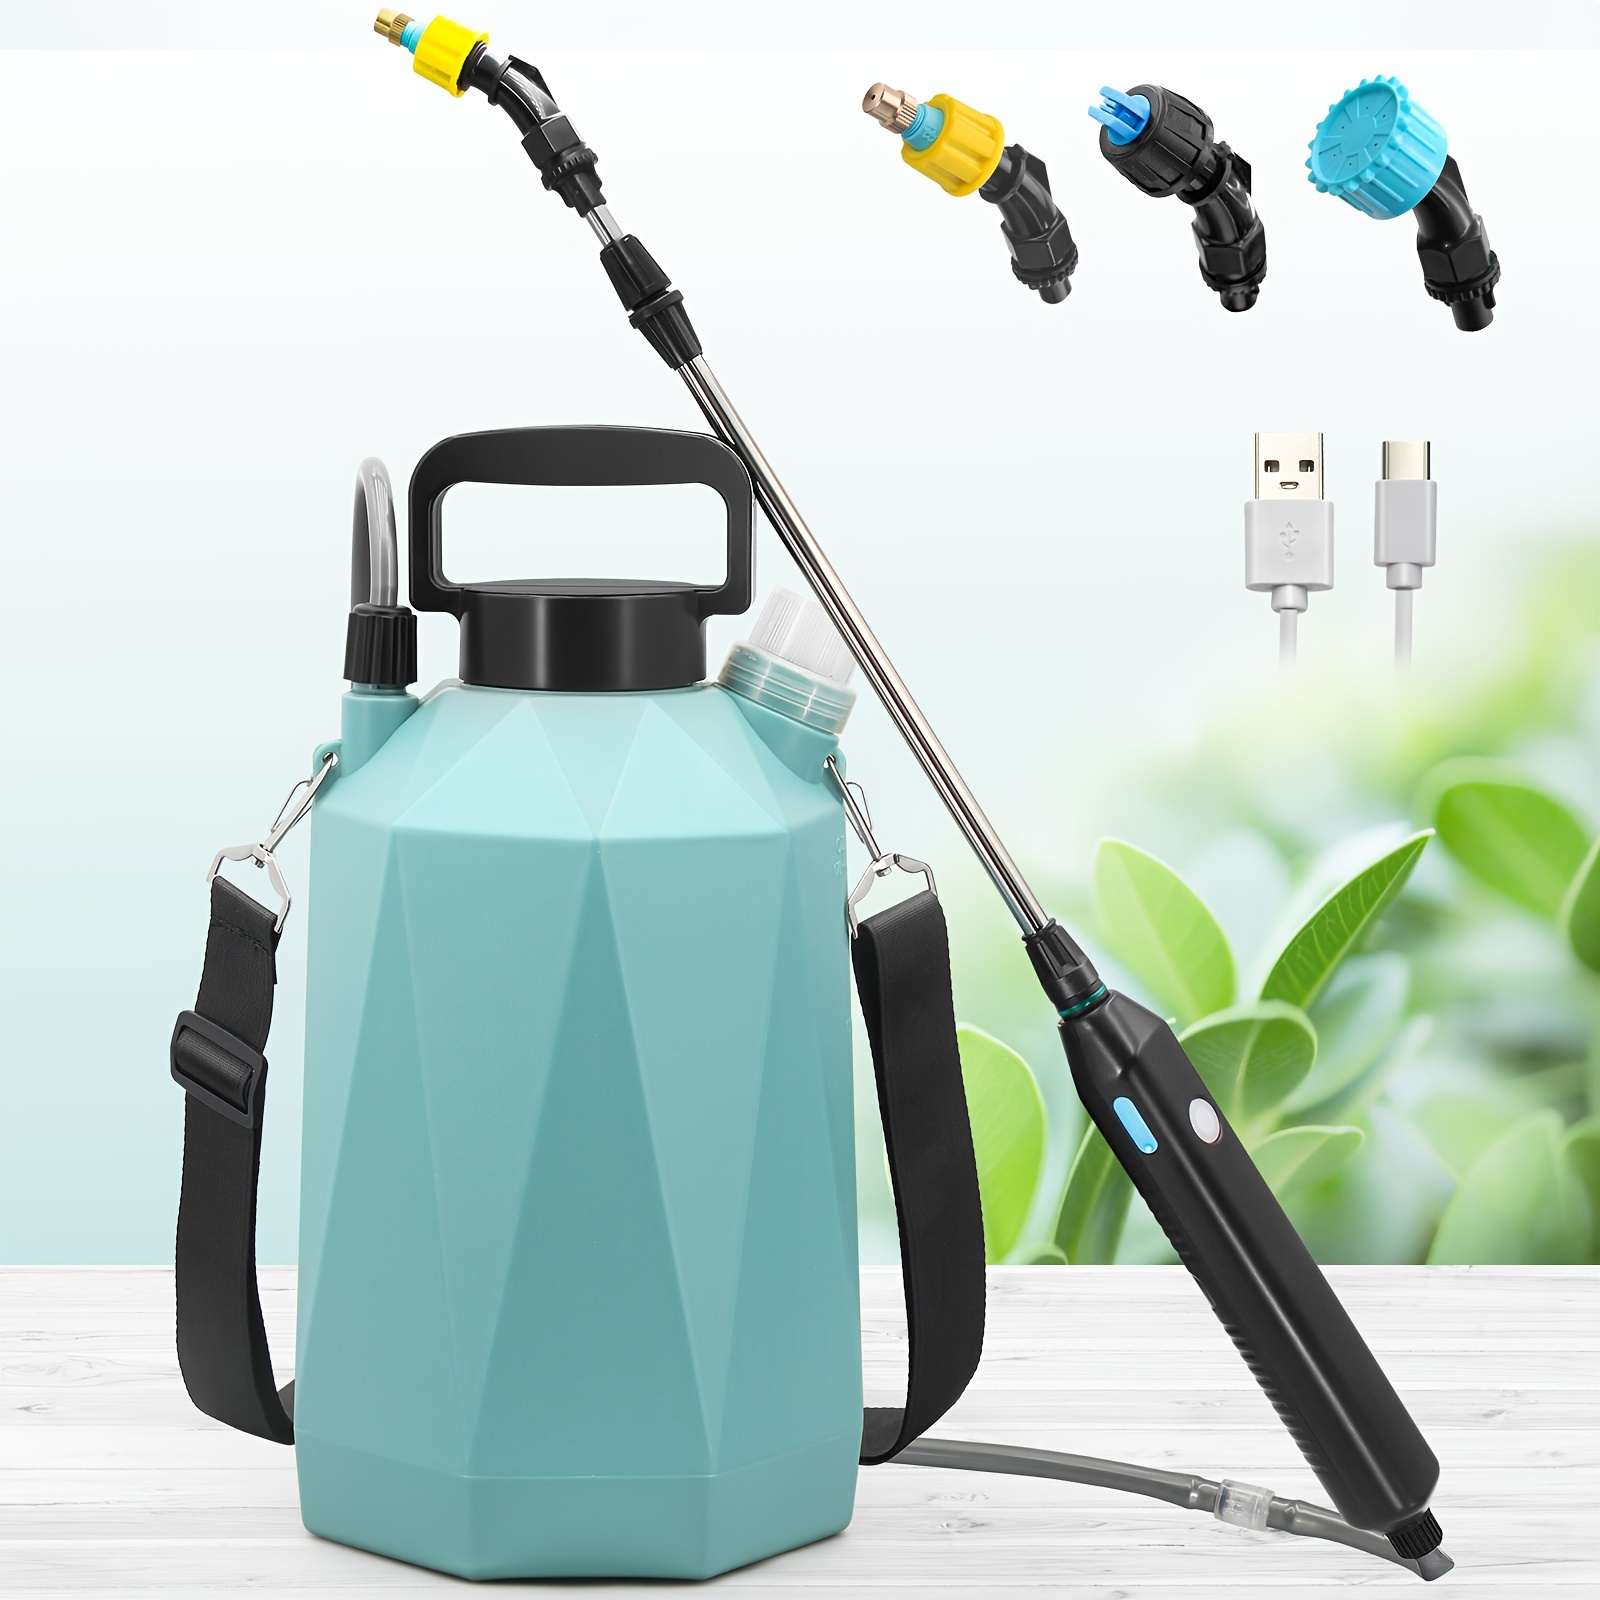 

Battery Powered Sprayer 1.35gallon/5l, Electric Garden Sprayer With Usb Rechargeable Handle